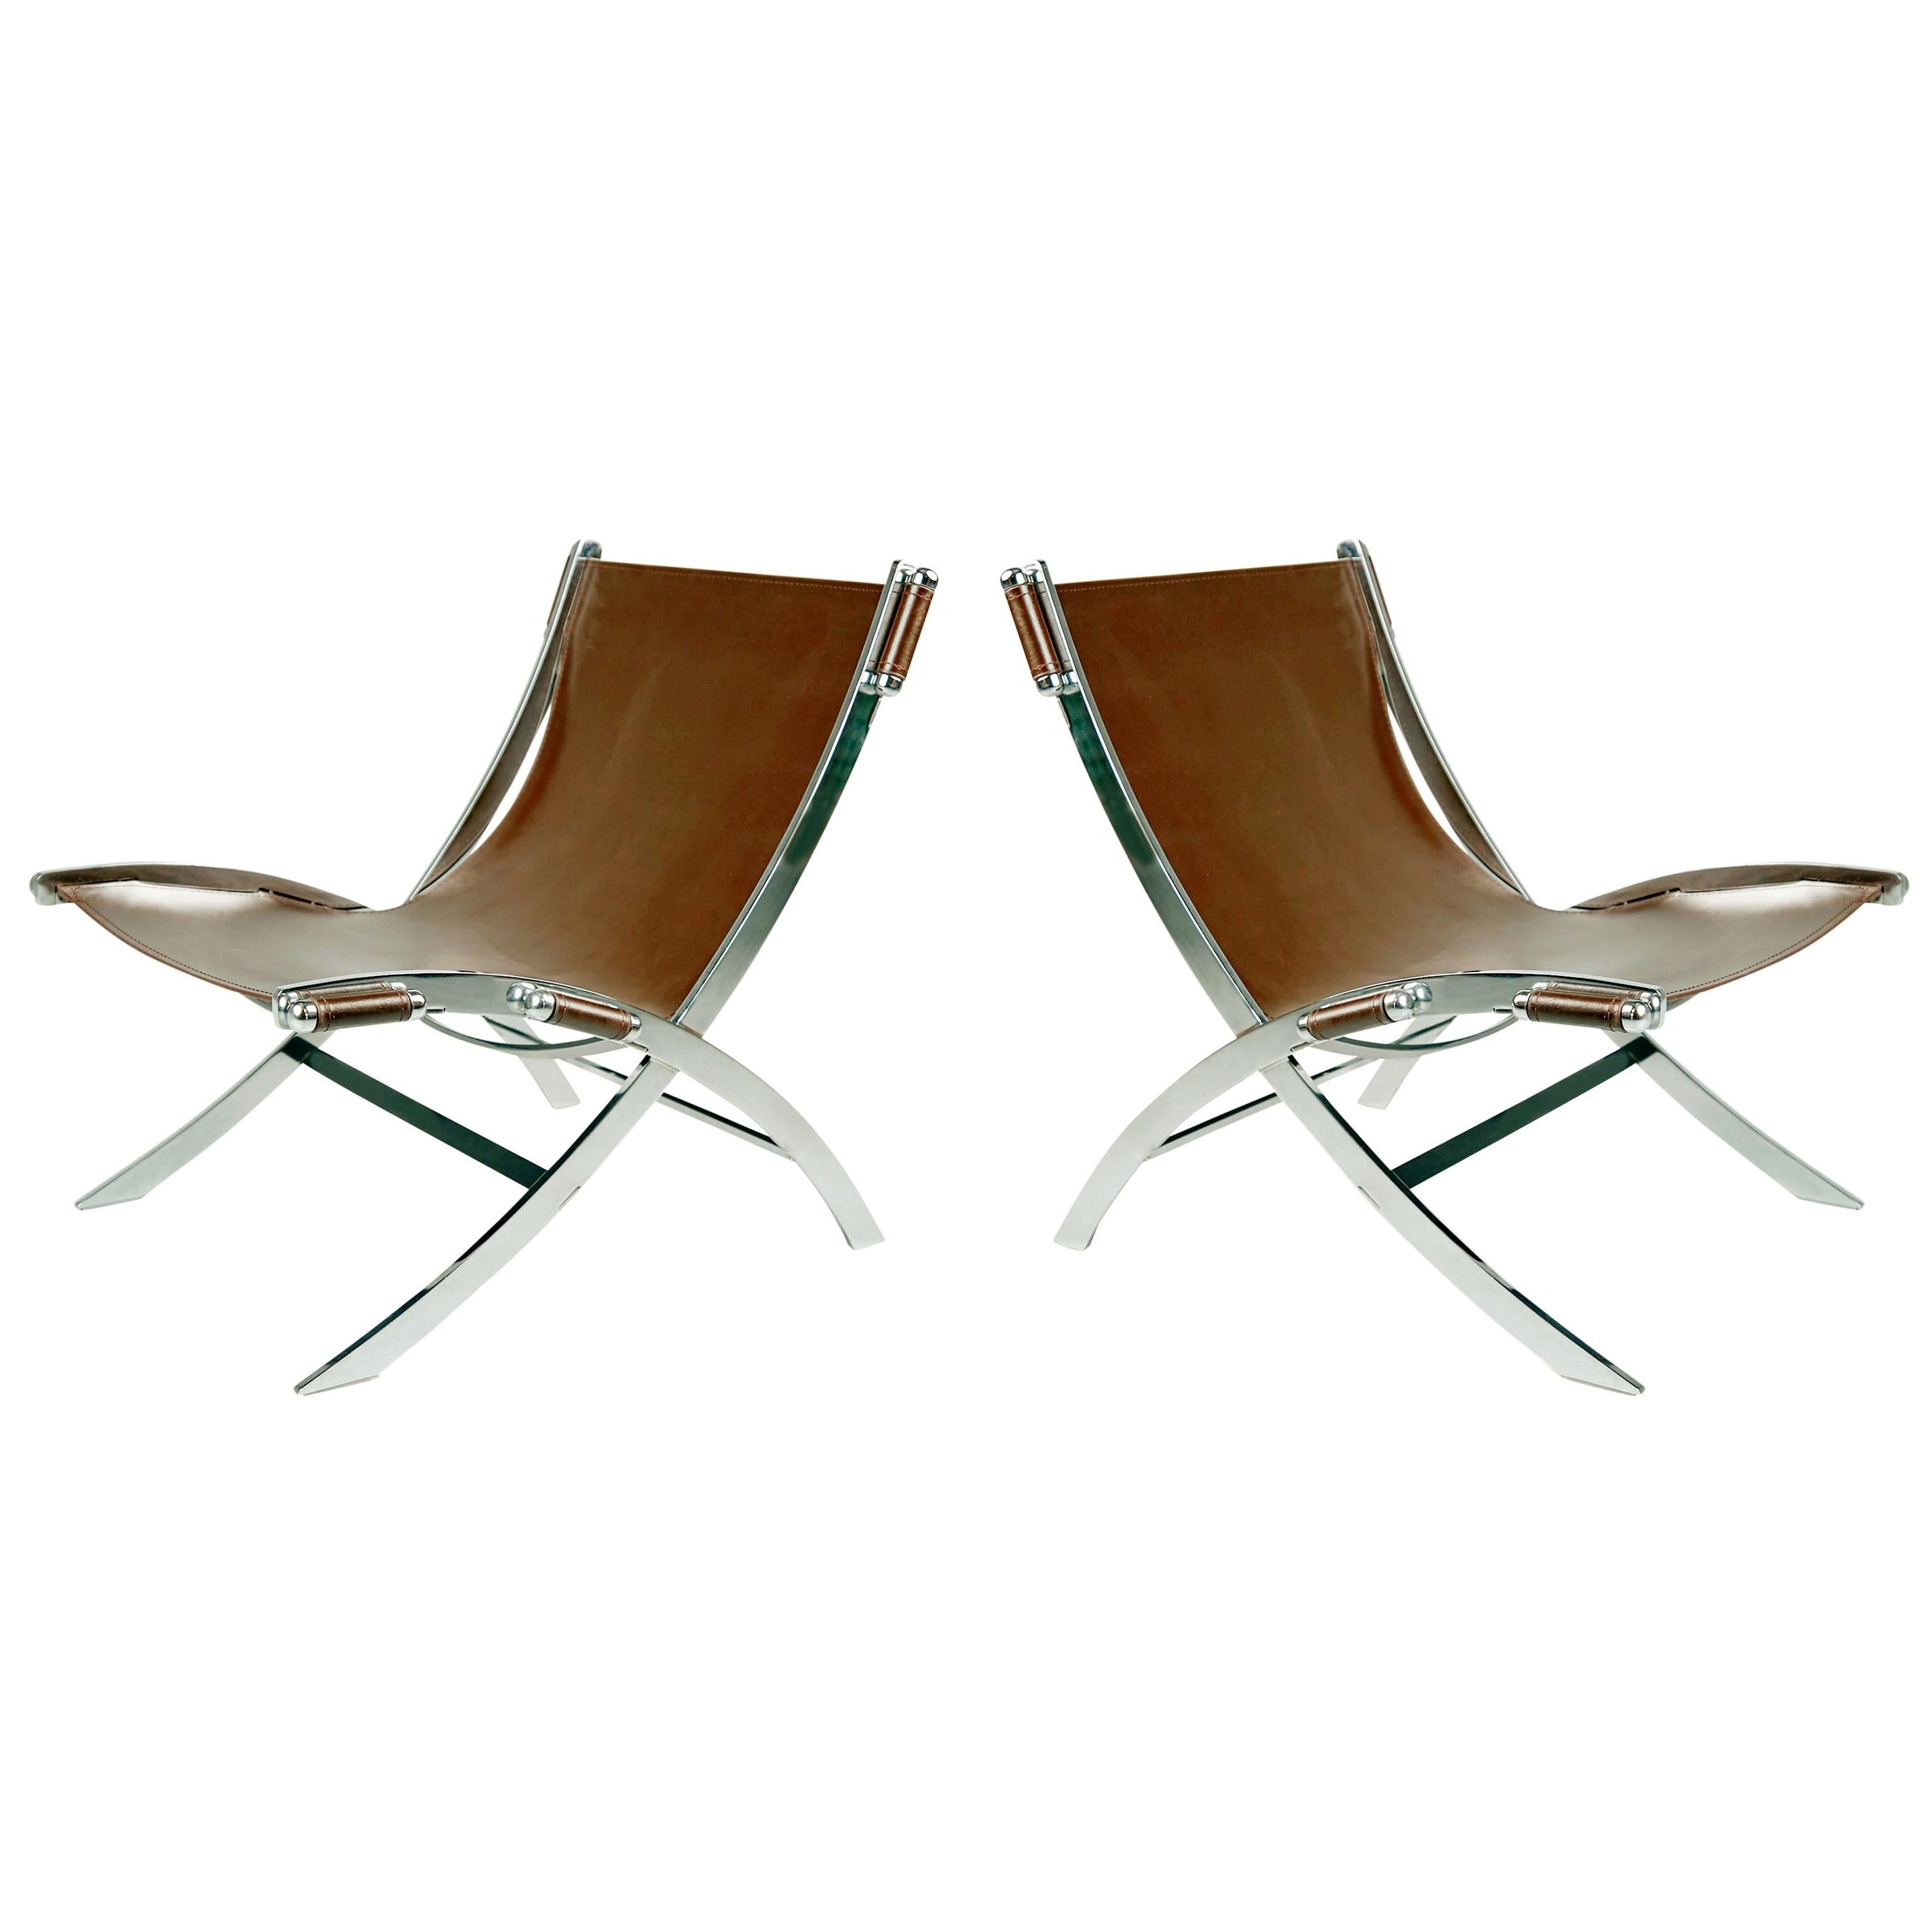 Pair of Antonio Citterio Leather Sling 'Timeless' Chairs for Flexform Italy